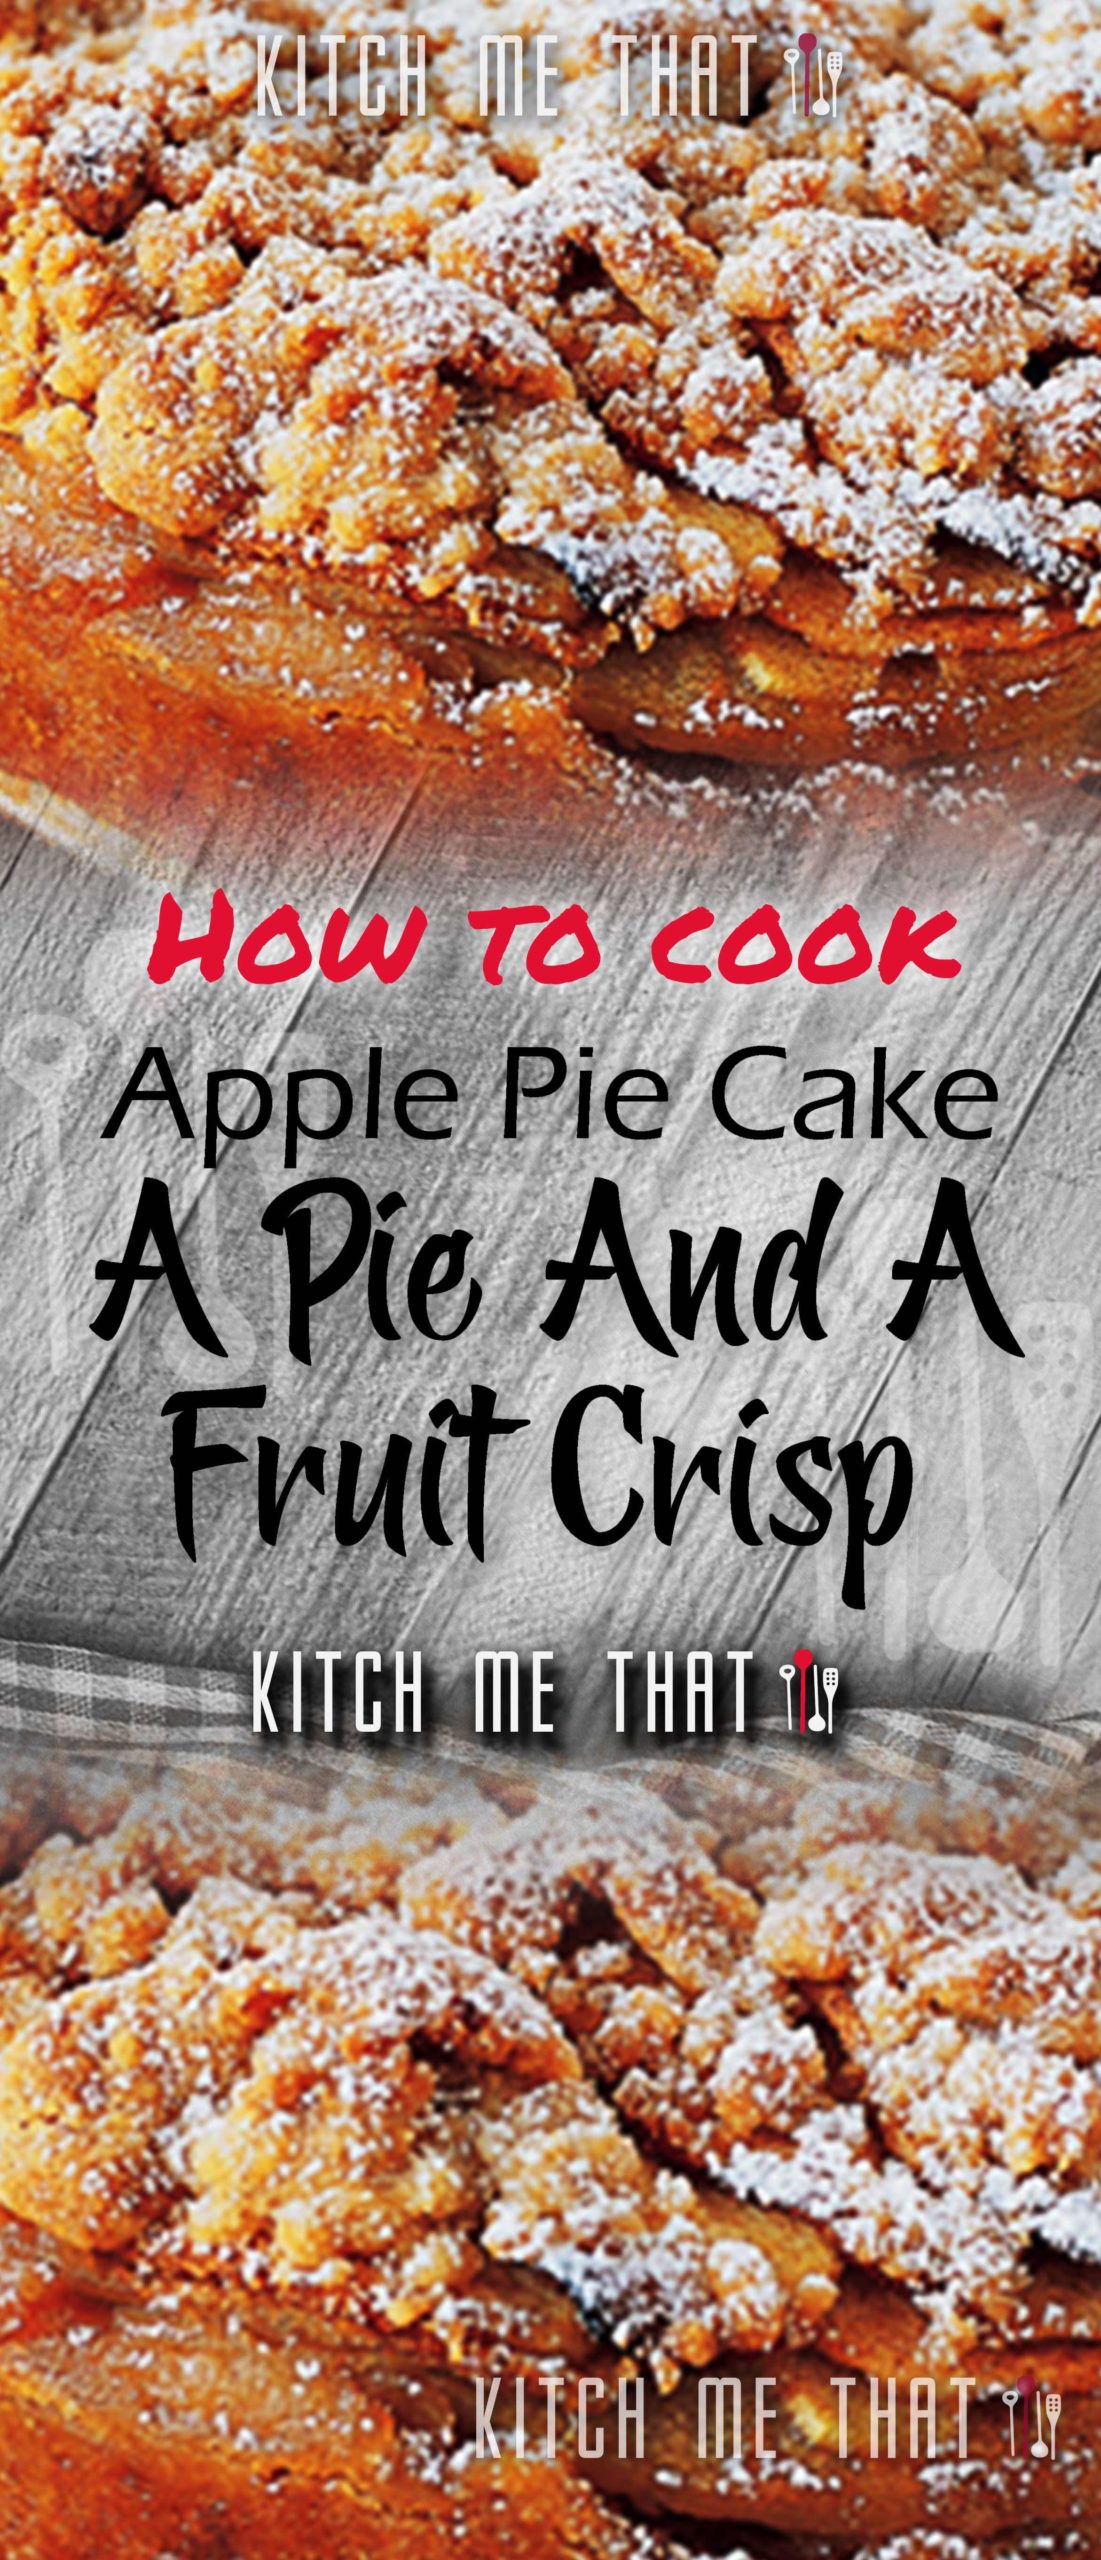 This Apple-Pie Cake Is A Cross Between A Pie And A Fruit Crisp